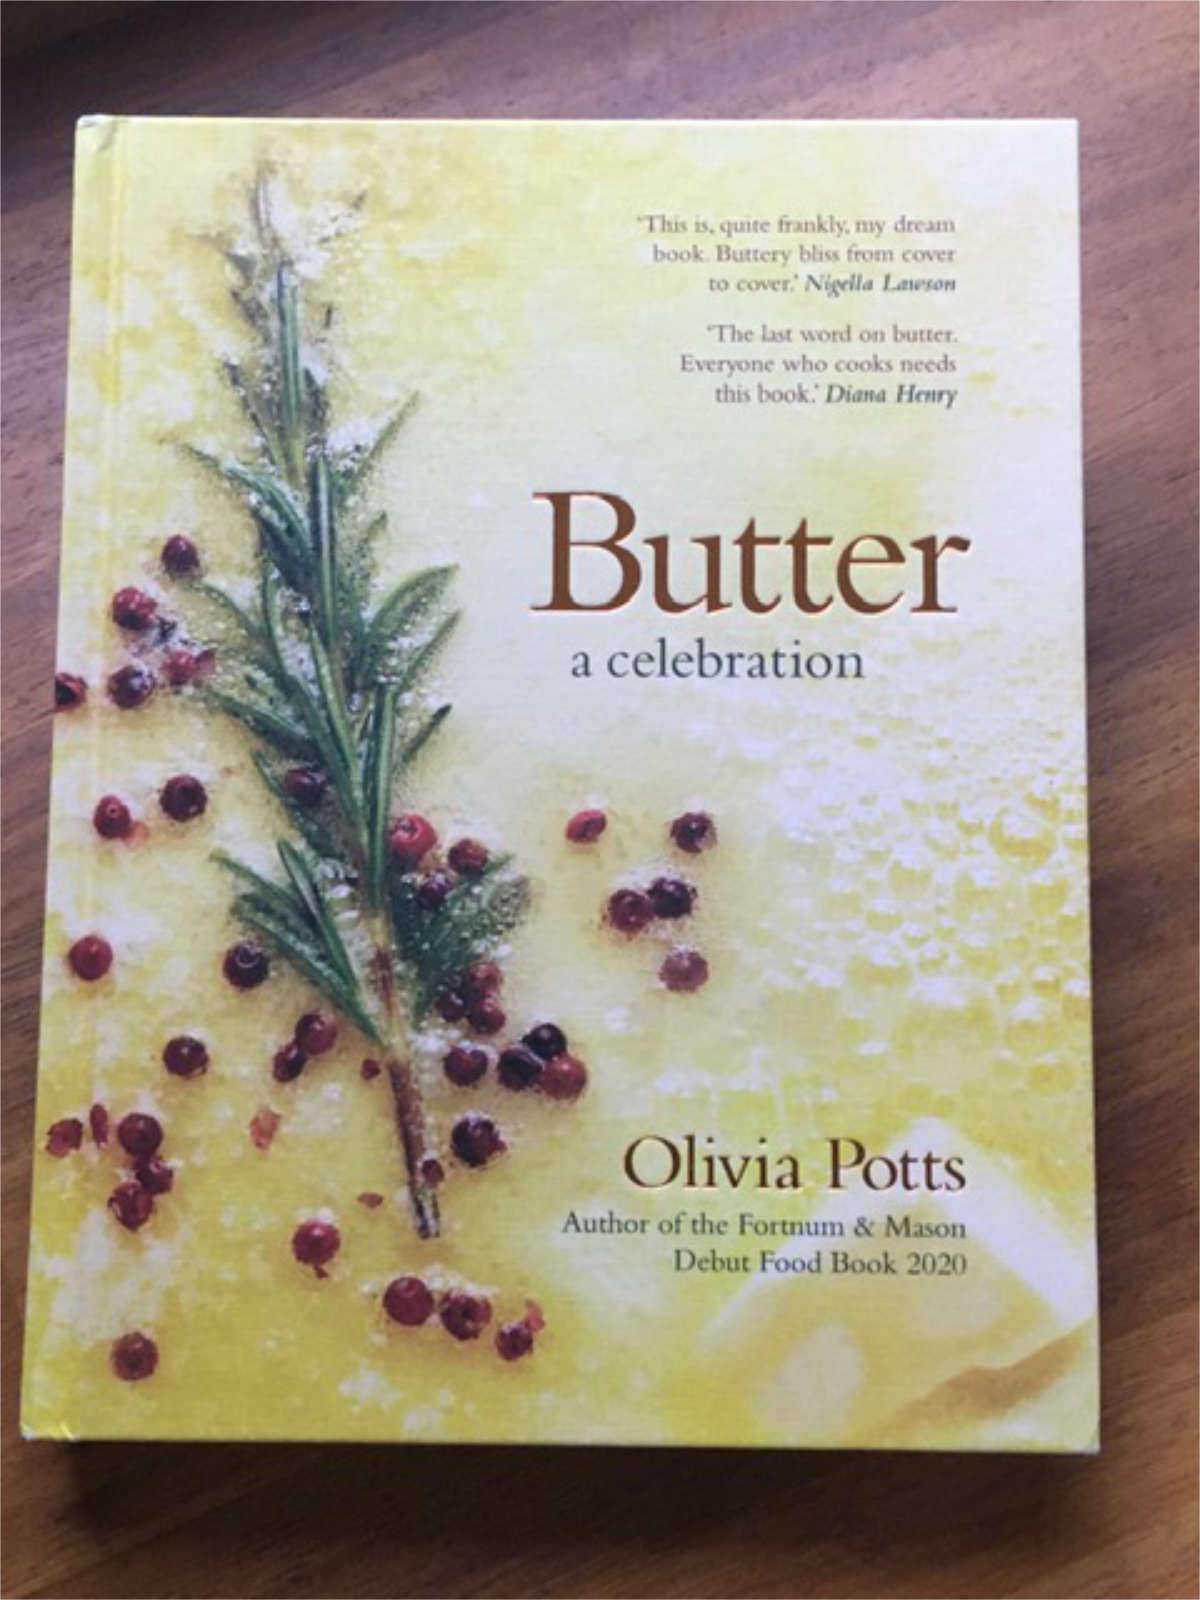 butter book cover